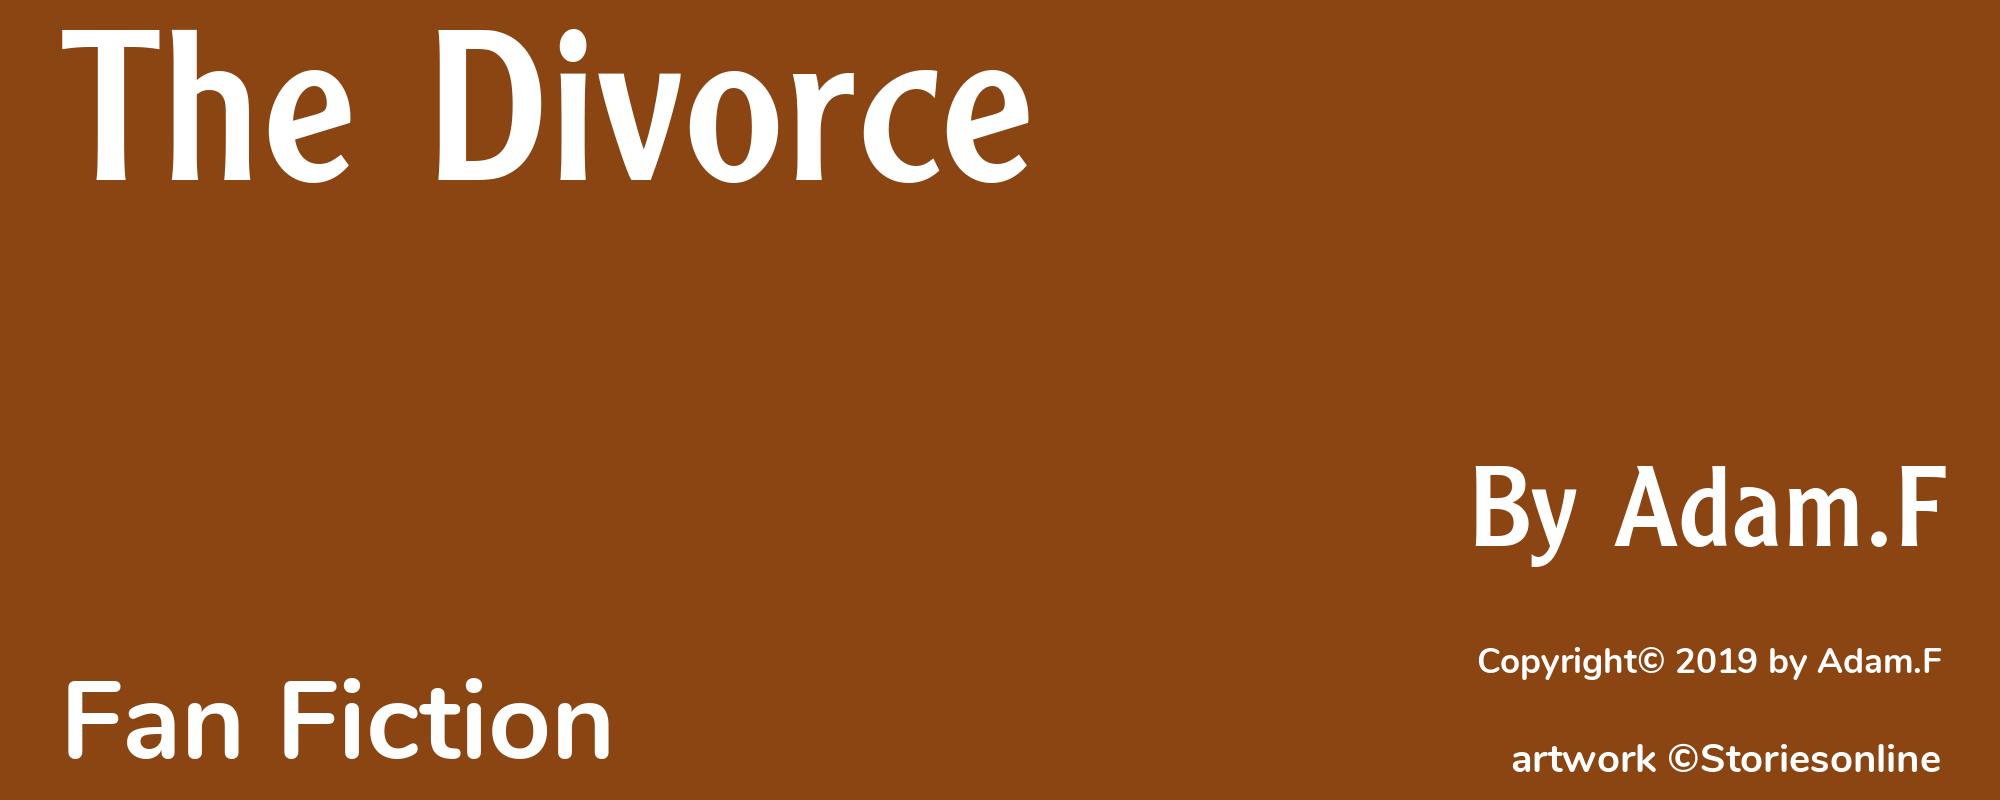 The Divorce - Cover